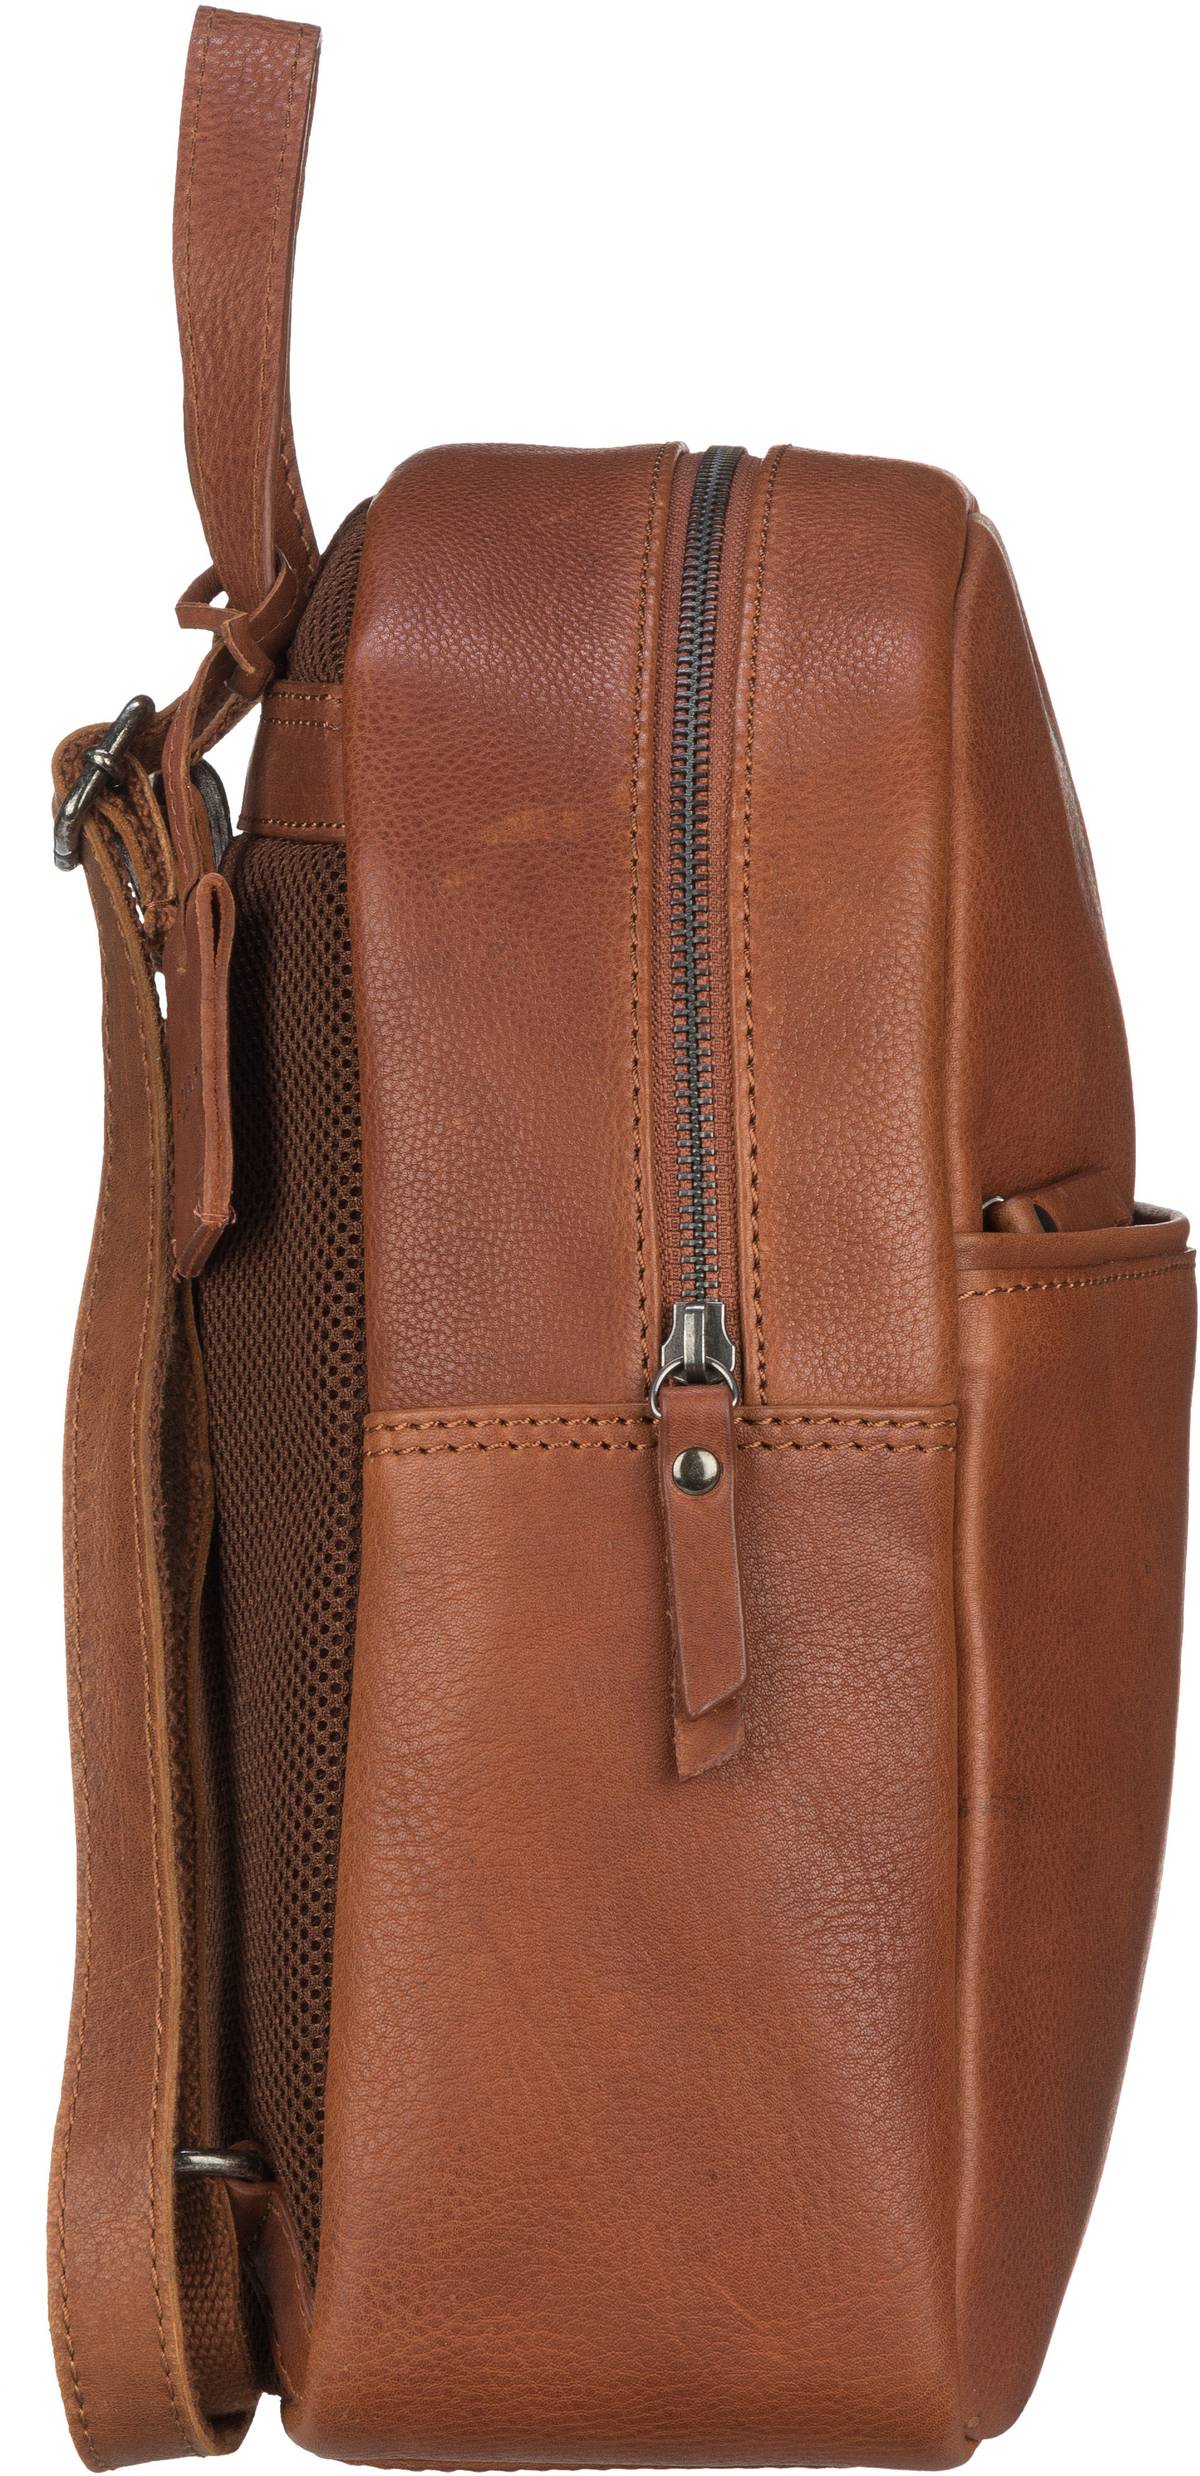 Burkely Antique Avery Backpack 5363 - Cognac